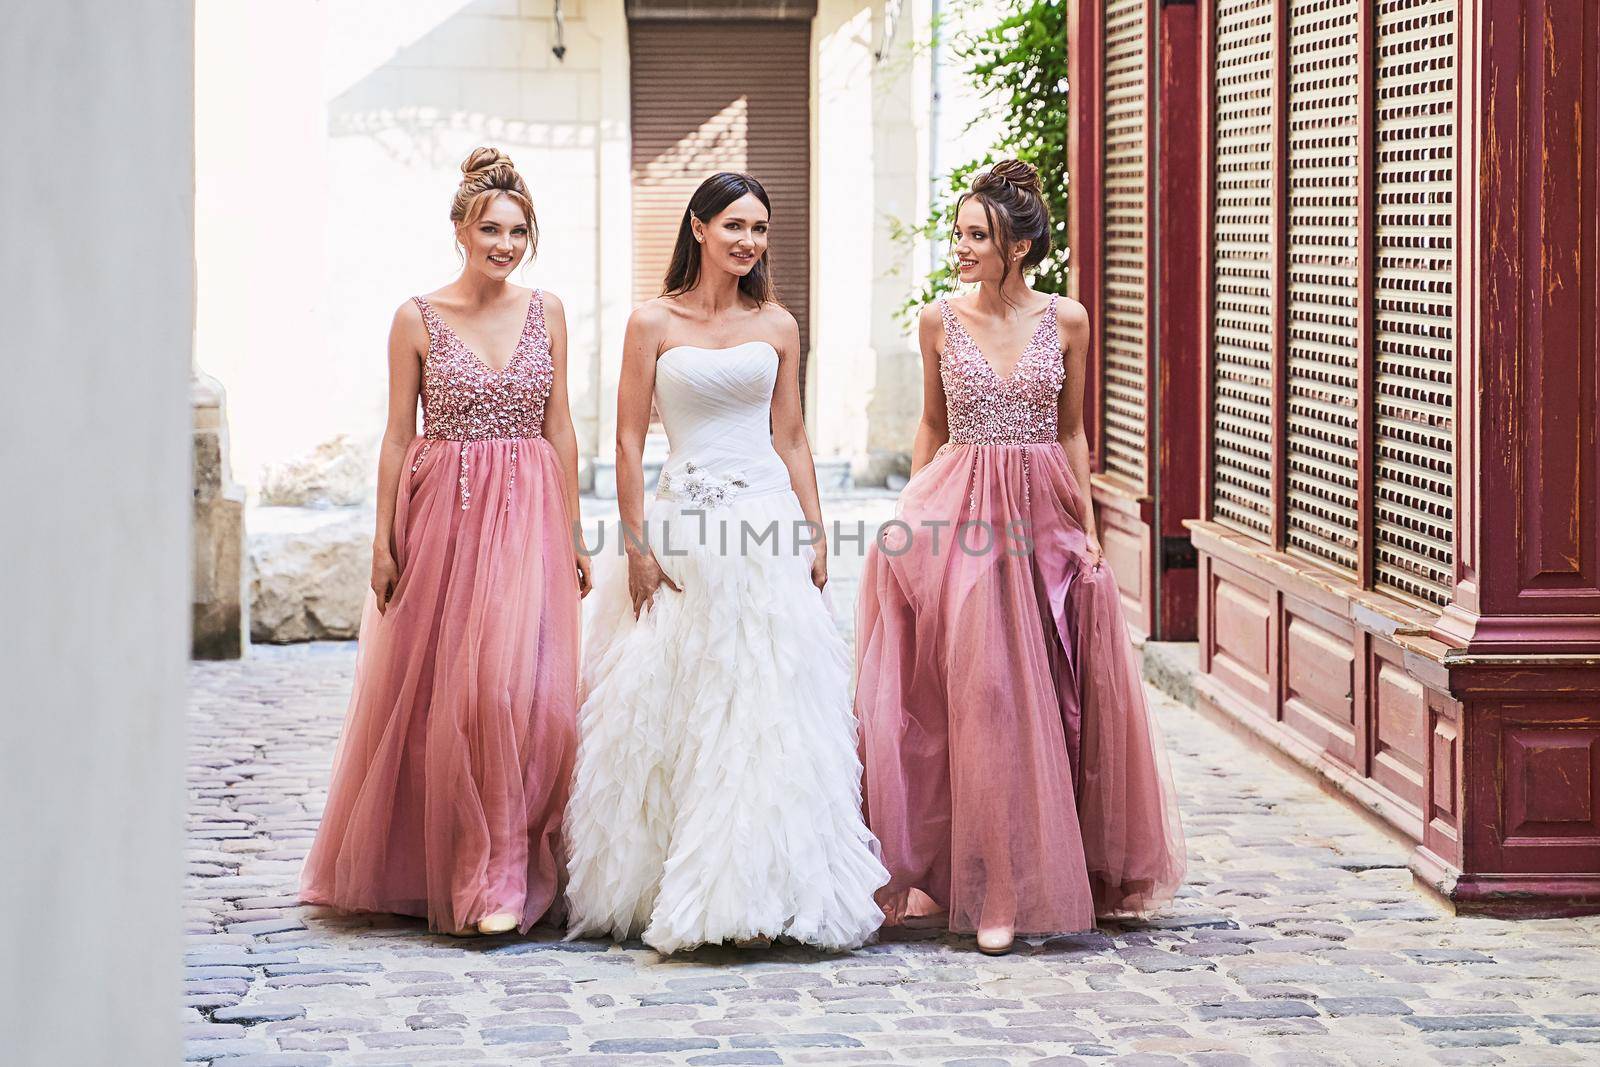 Beautiful bride and bridesmaids walking on the cobblestone street. Maids wear gorgeous elegant stylish red pink violet floor length v neck chiffon gown dress decorated with sequins sparkles and rhinestones. Wedding day in old beautiful European city. by berezko